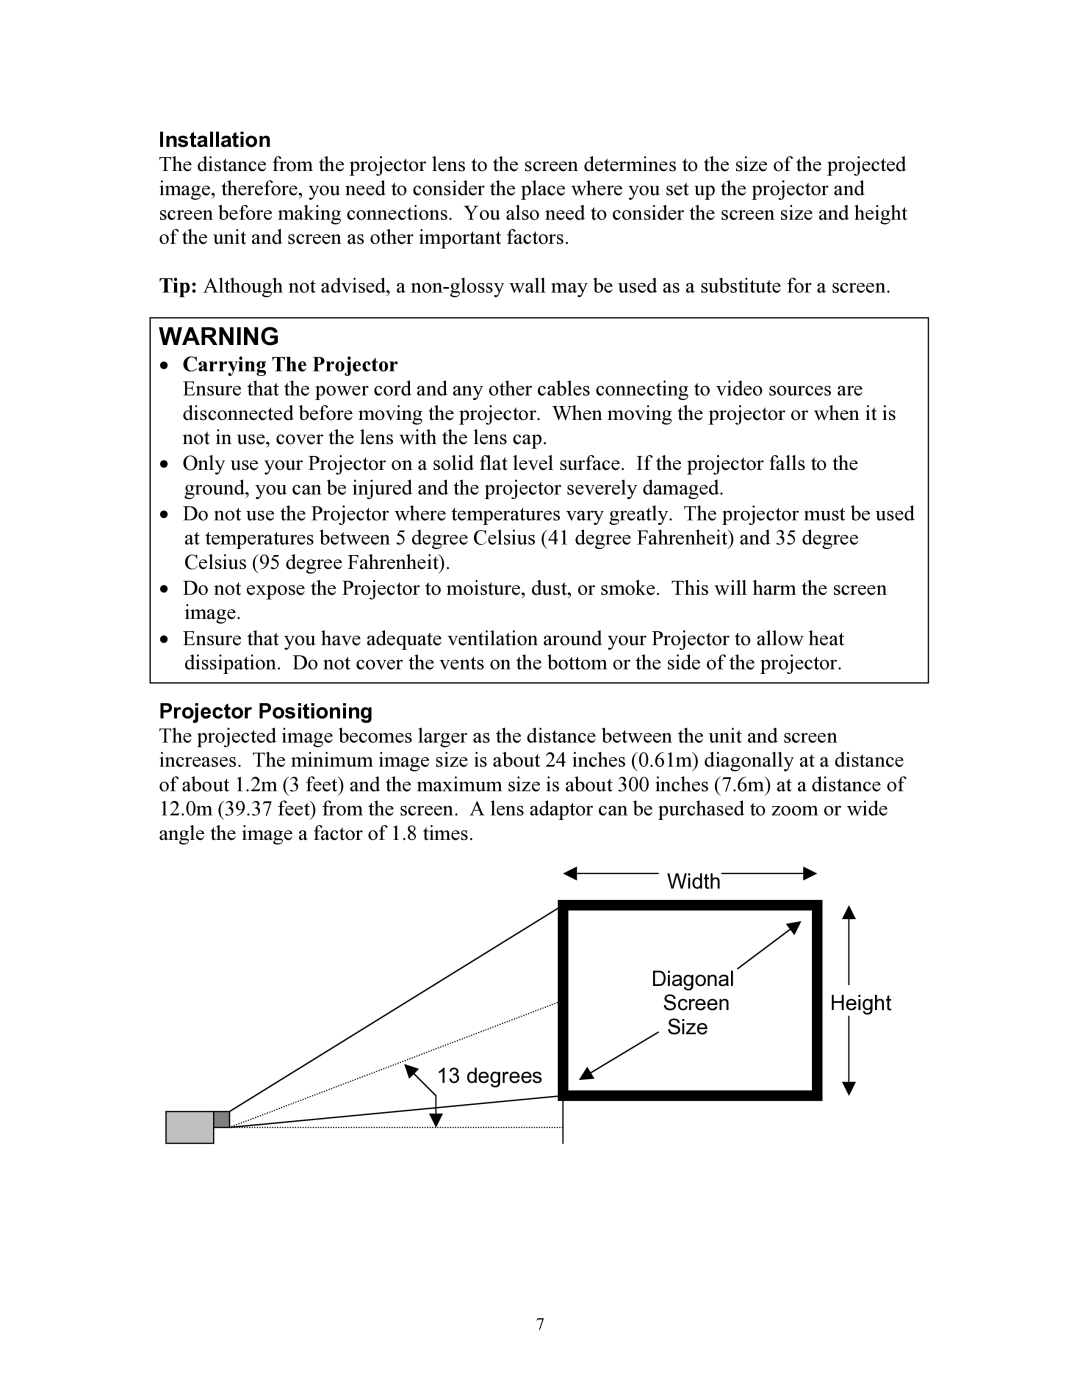 Knoll Systems HT200 user manual Installation, Carrying The Projector, Projector Positioning 